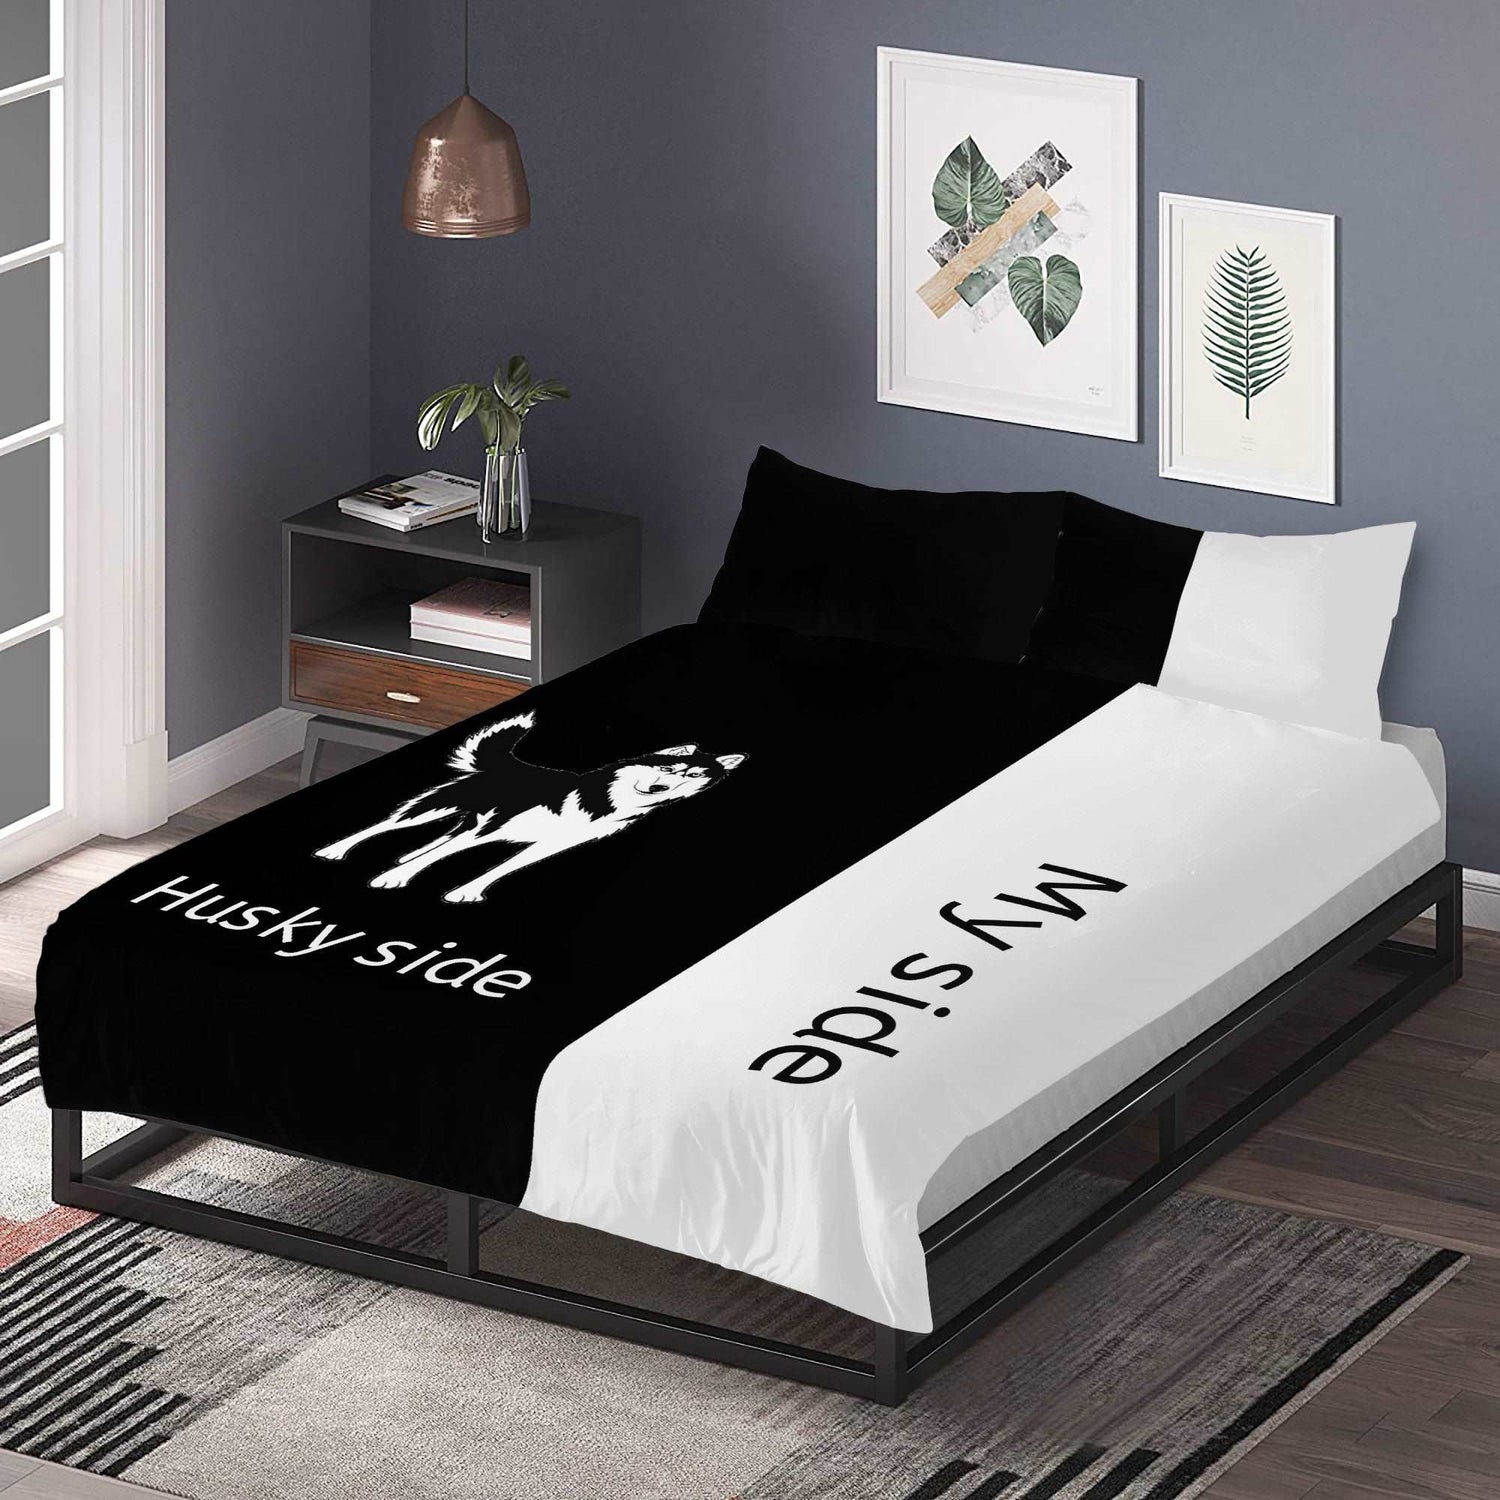 Bedding Husky Home-clothes-jewelry